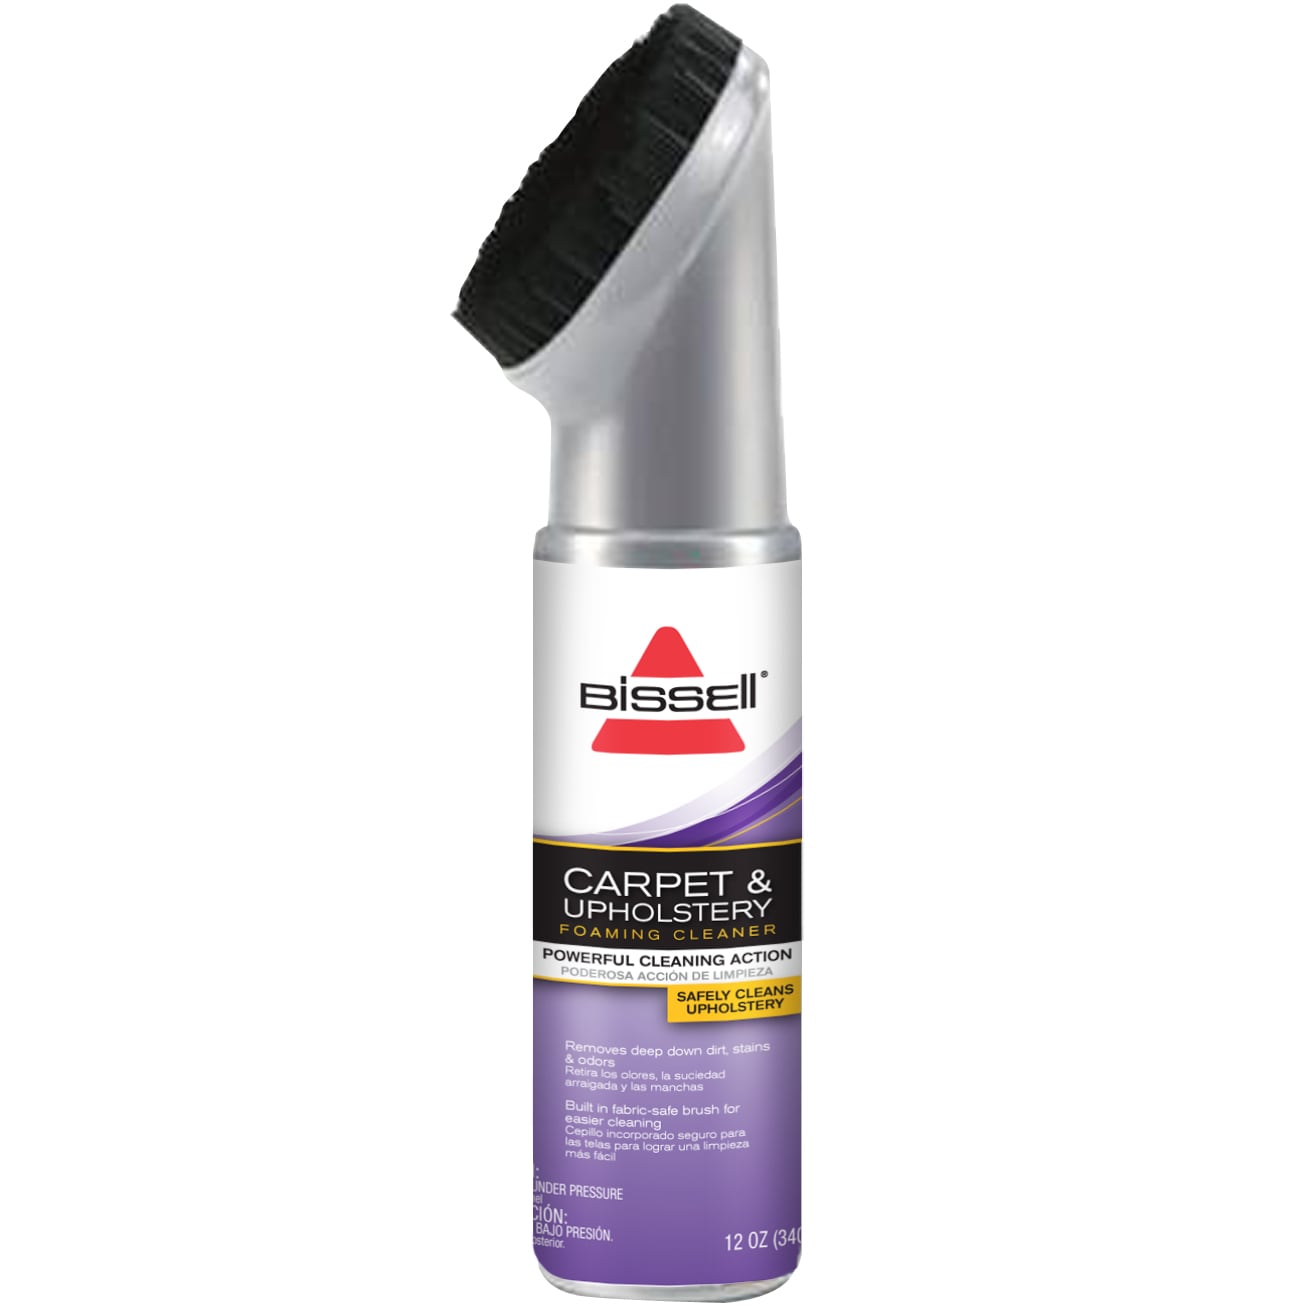 Shout Carpet Aerosol Stain and Odor Foaming Spray with OXY Power